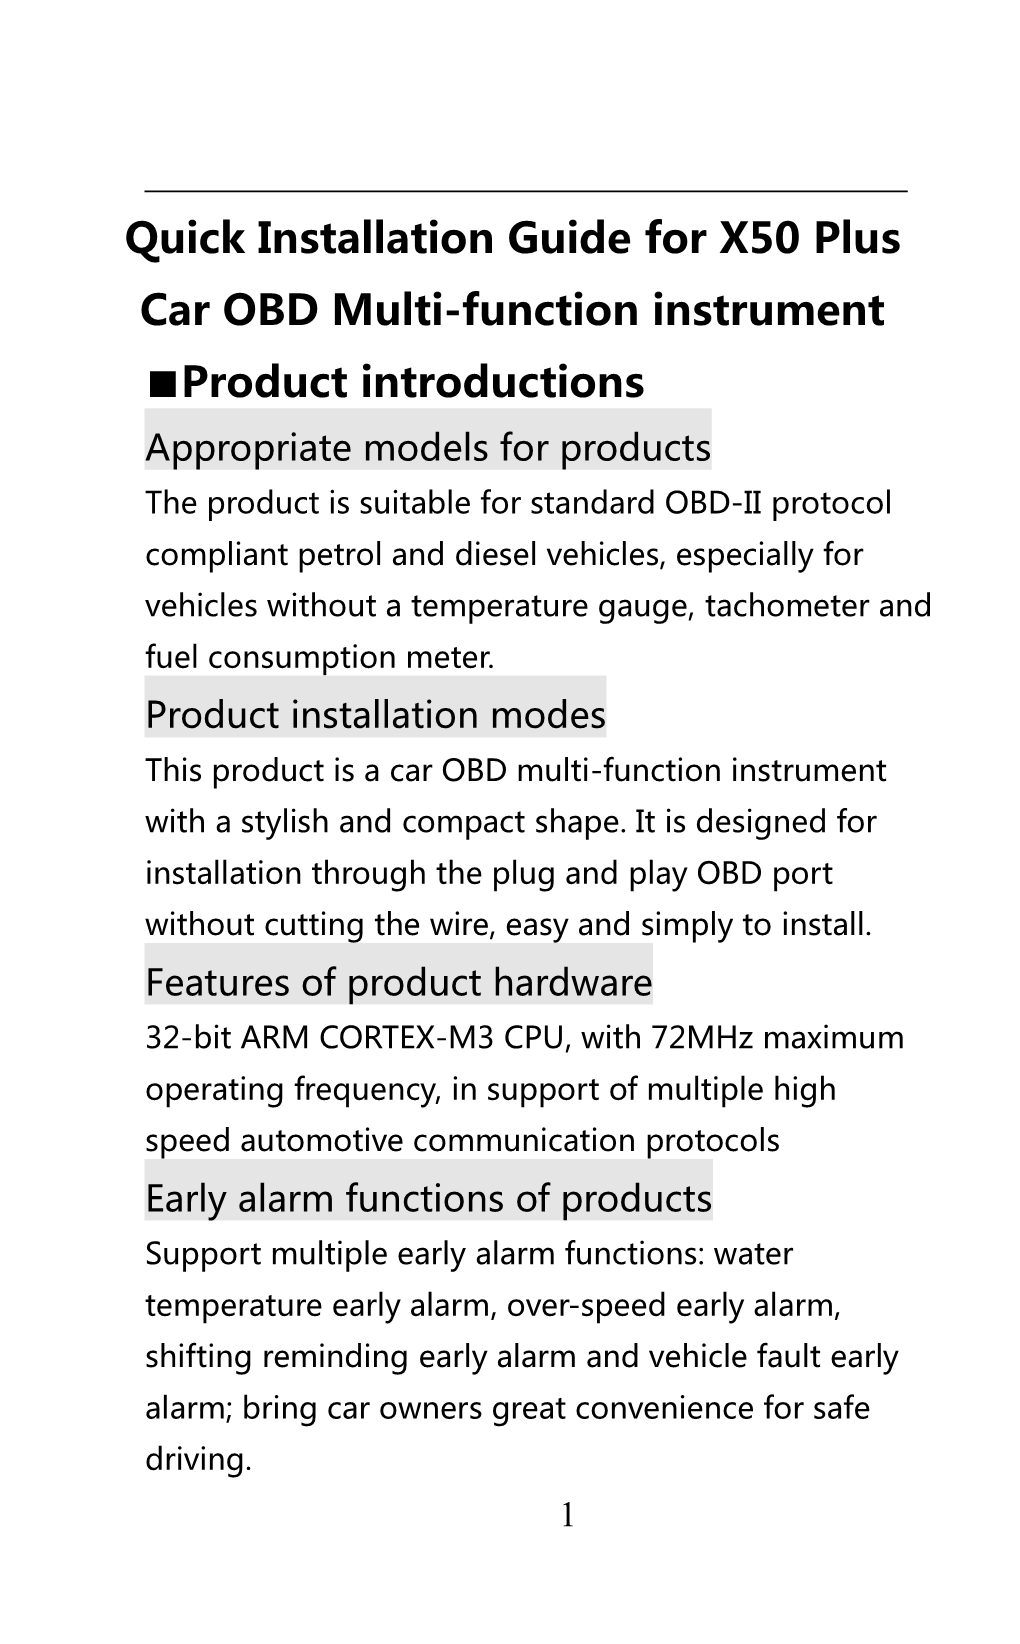 Quick Installation Guide for X50 Plus Car OBD Multi-Function Instrument